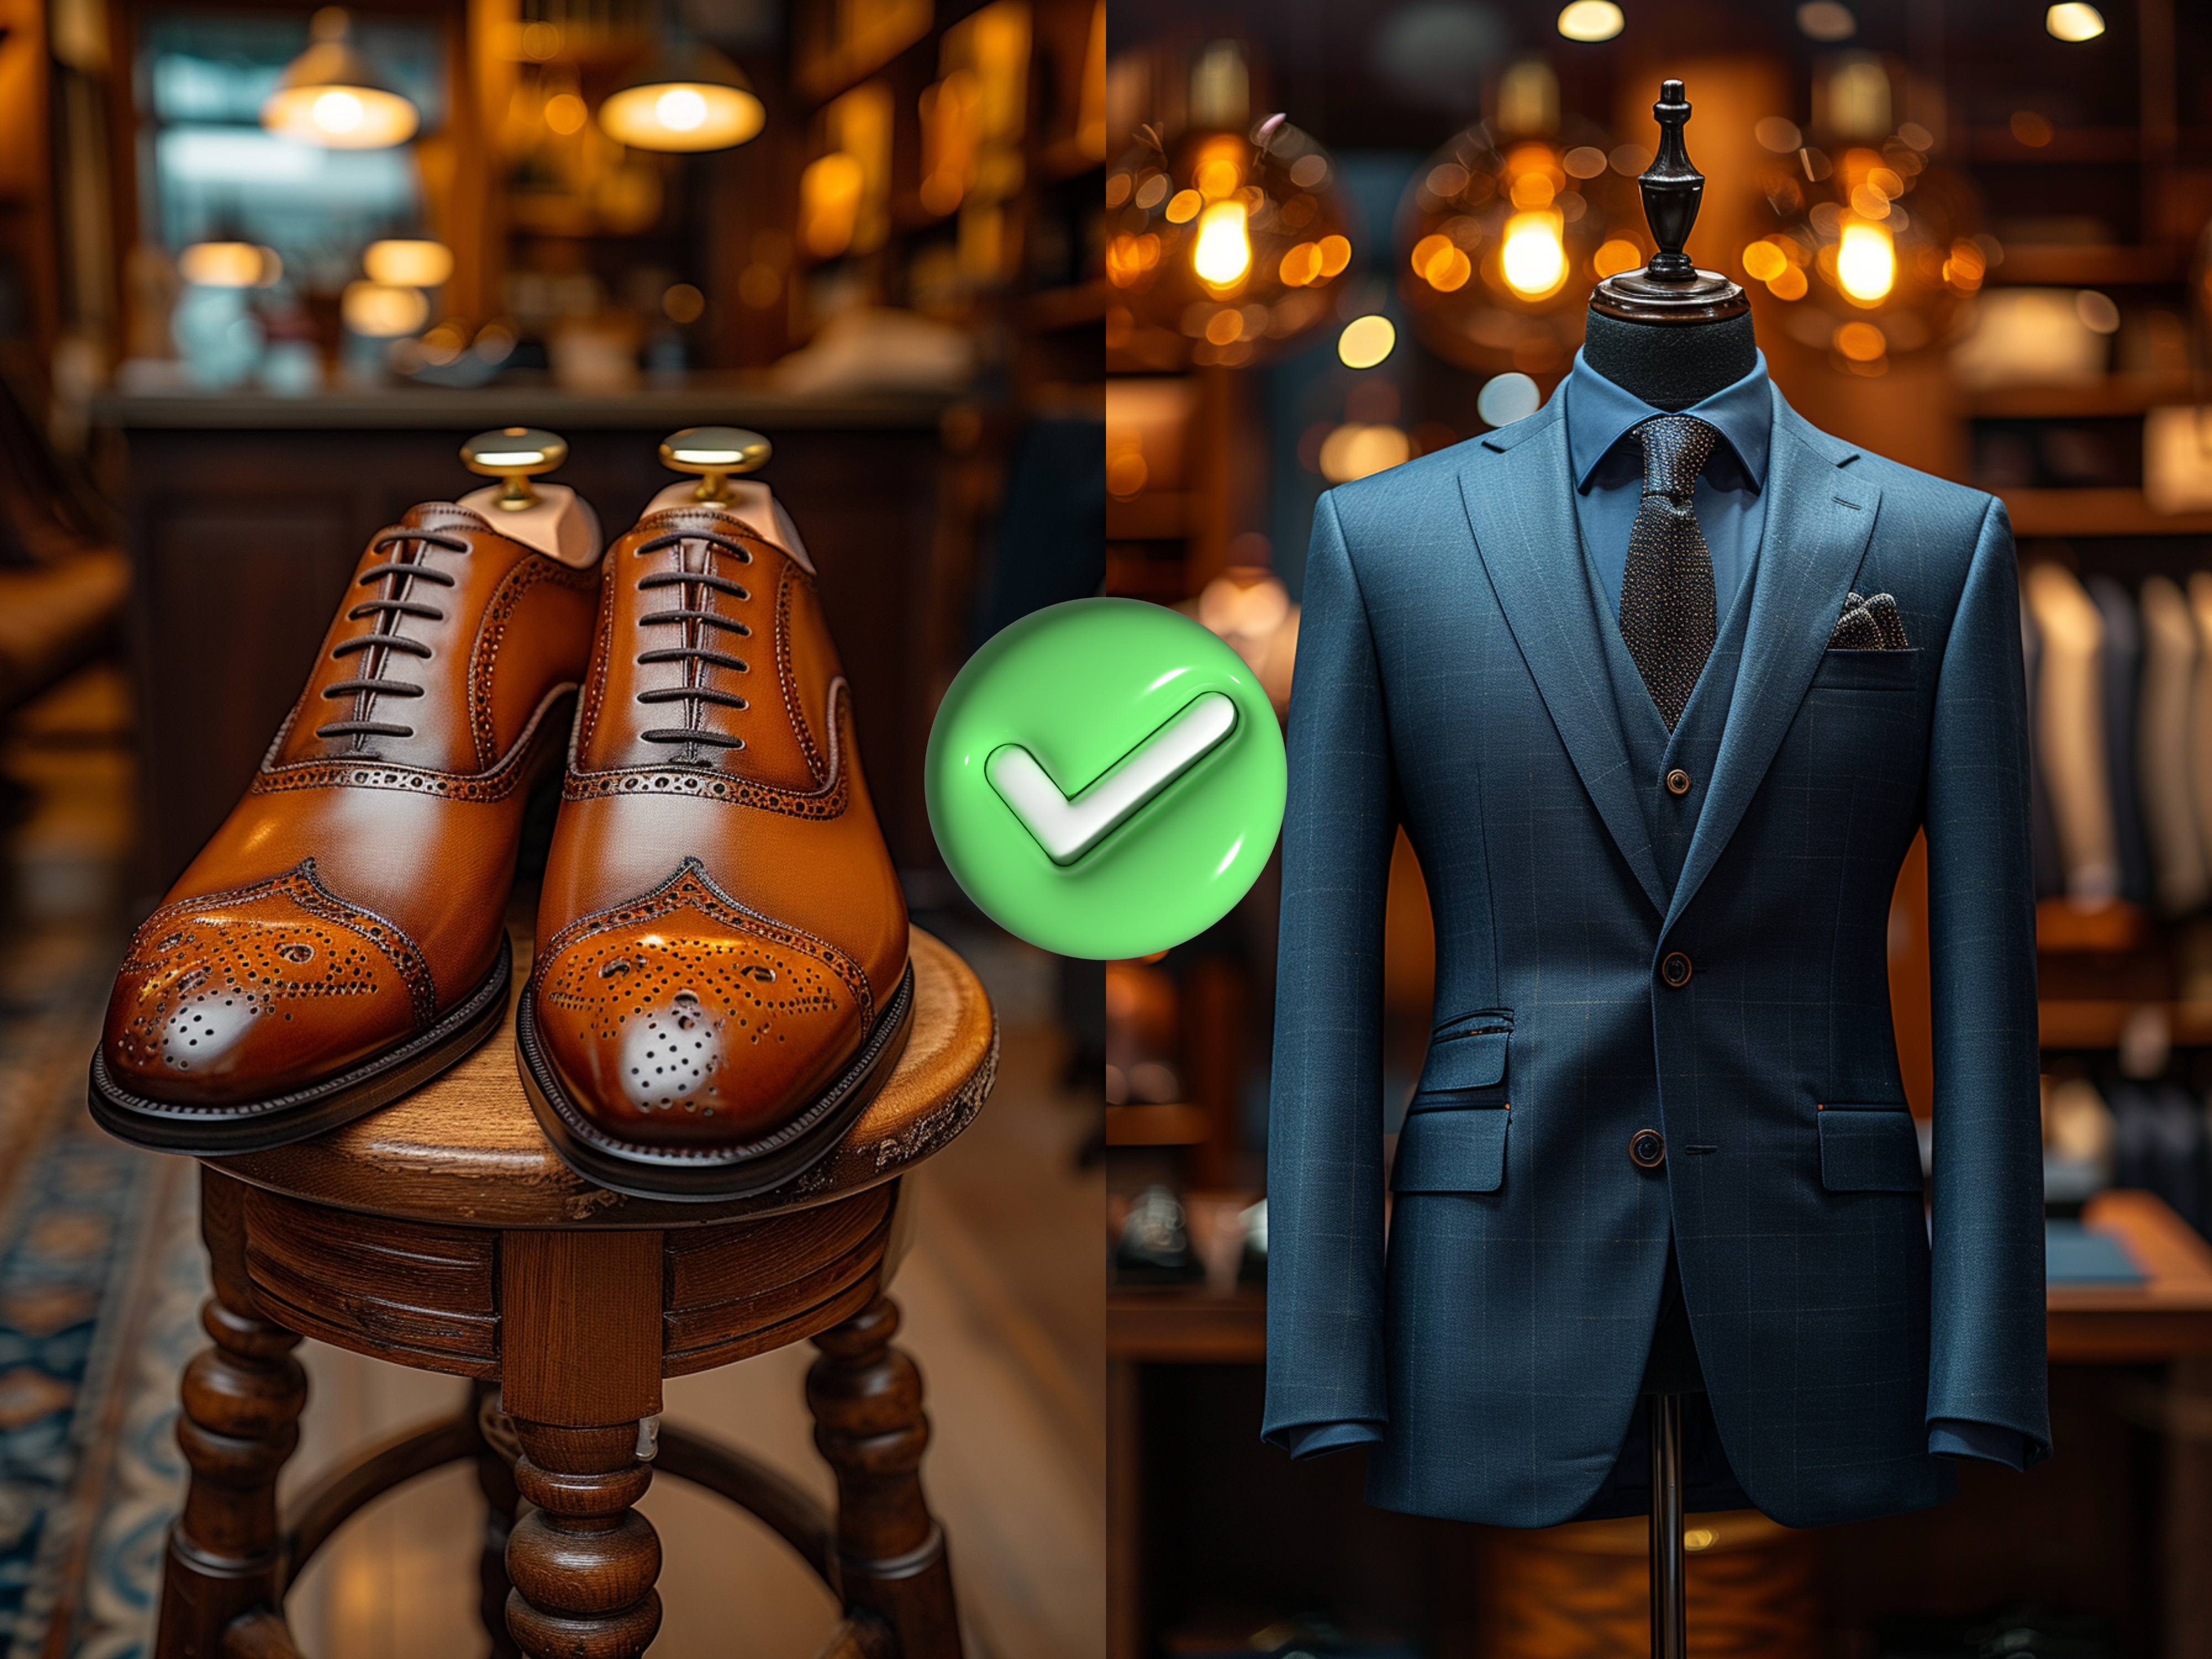 A pair of polished brown dress shoes sits on a wooden stool next to a mannequin dressed in a blue suit. A green checkmark is displayed between them. The background is a warmly lit clothing store.